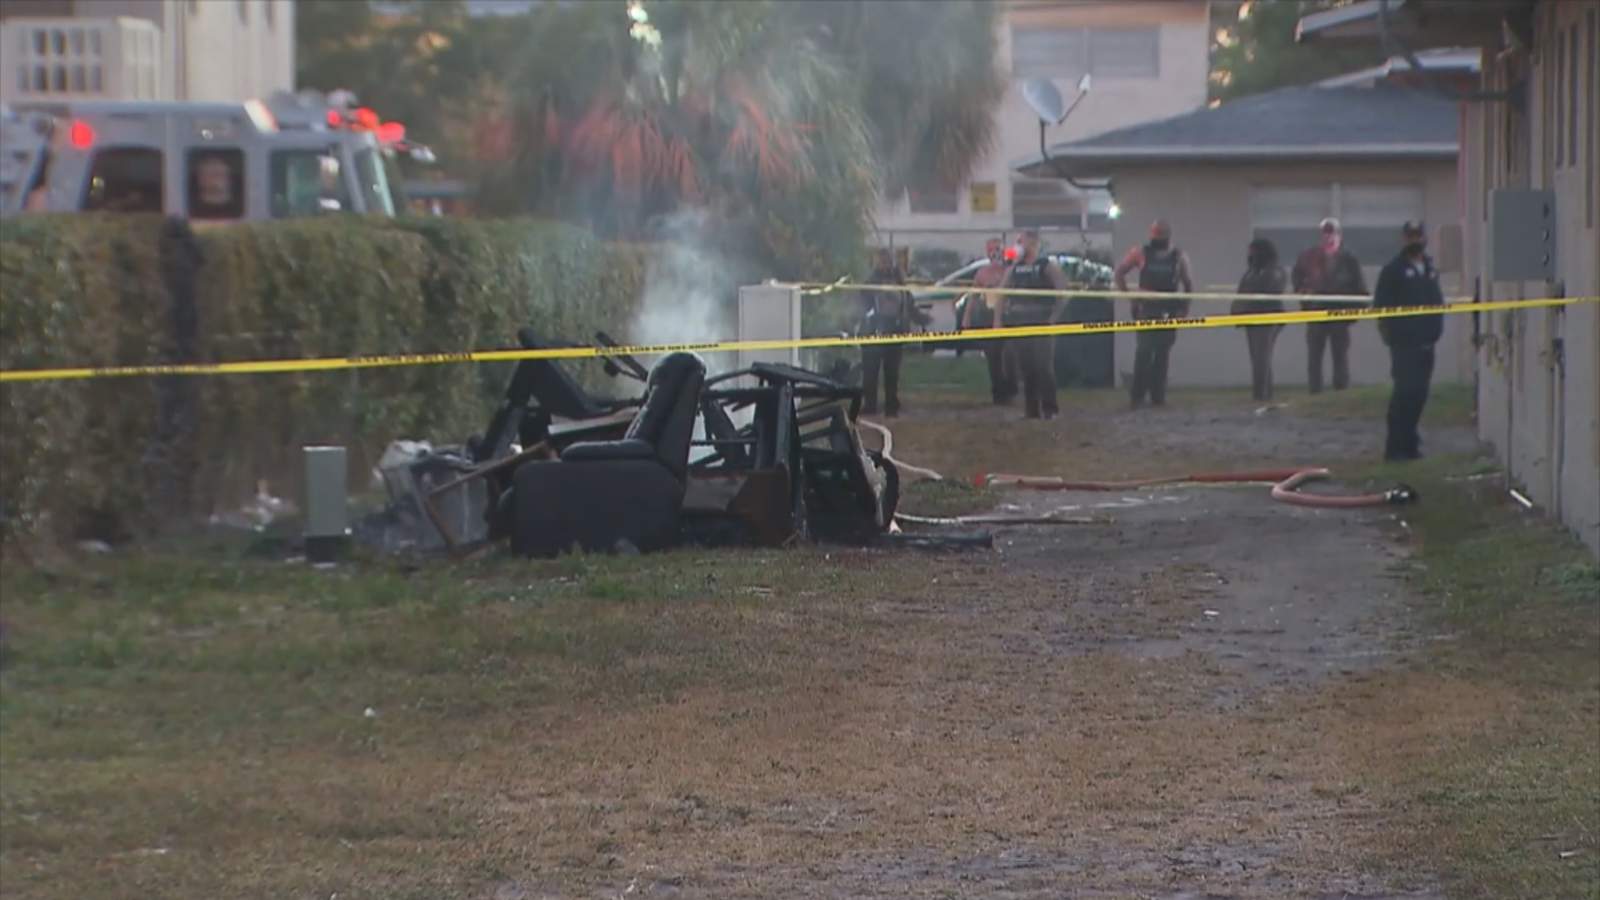 Police need help identifying man found dead in Miami-Dade rubbish fire